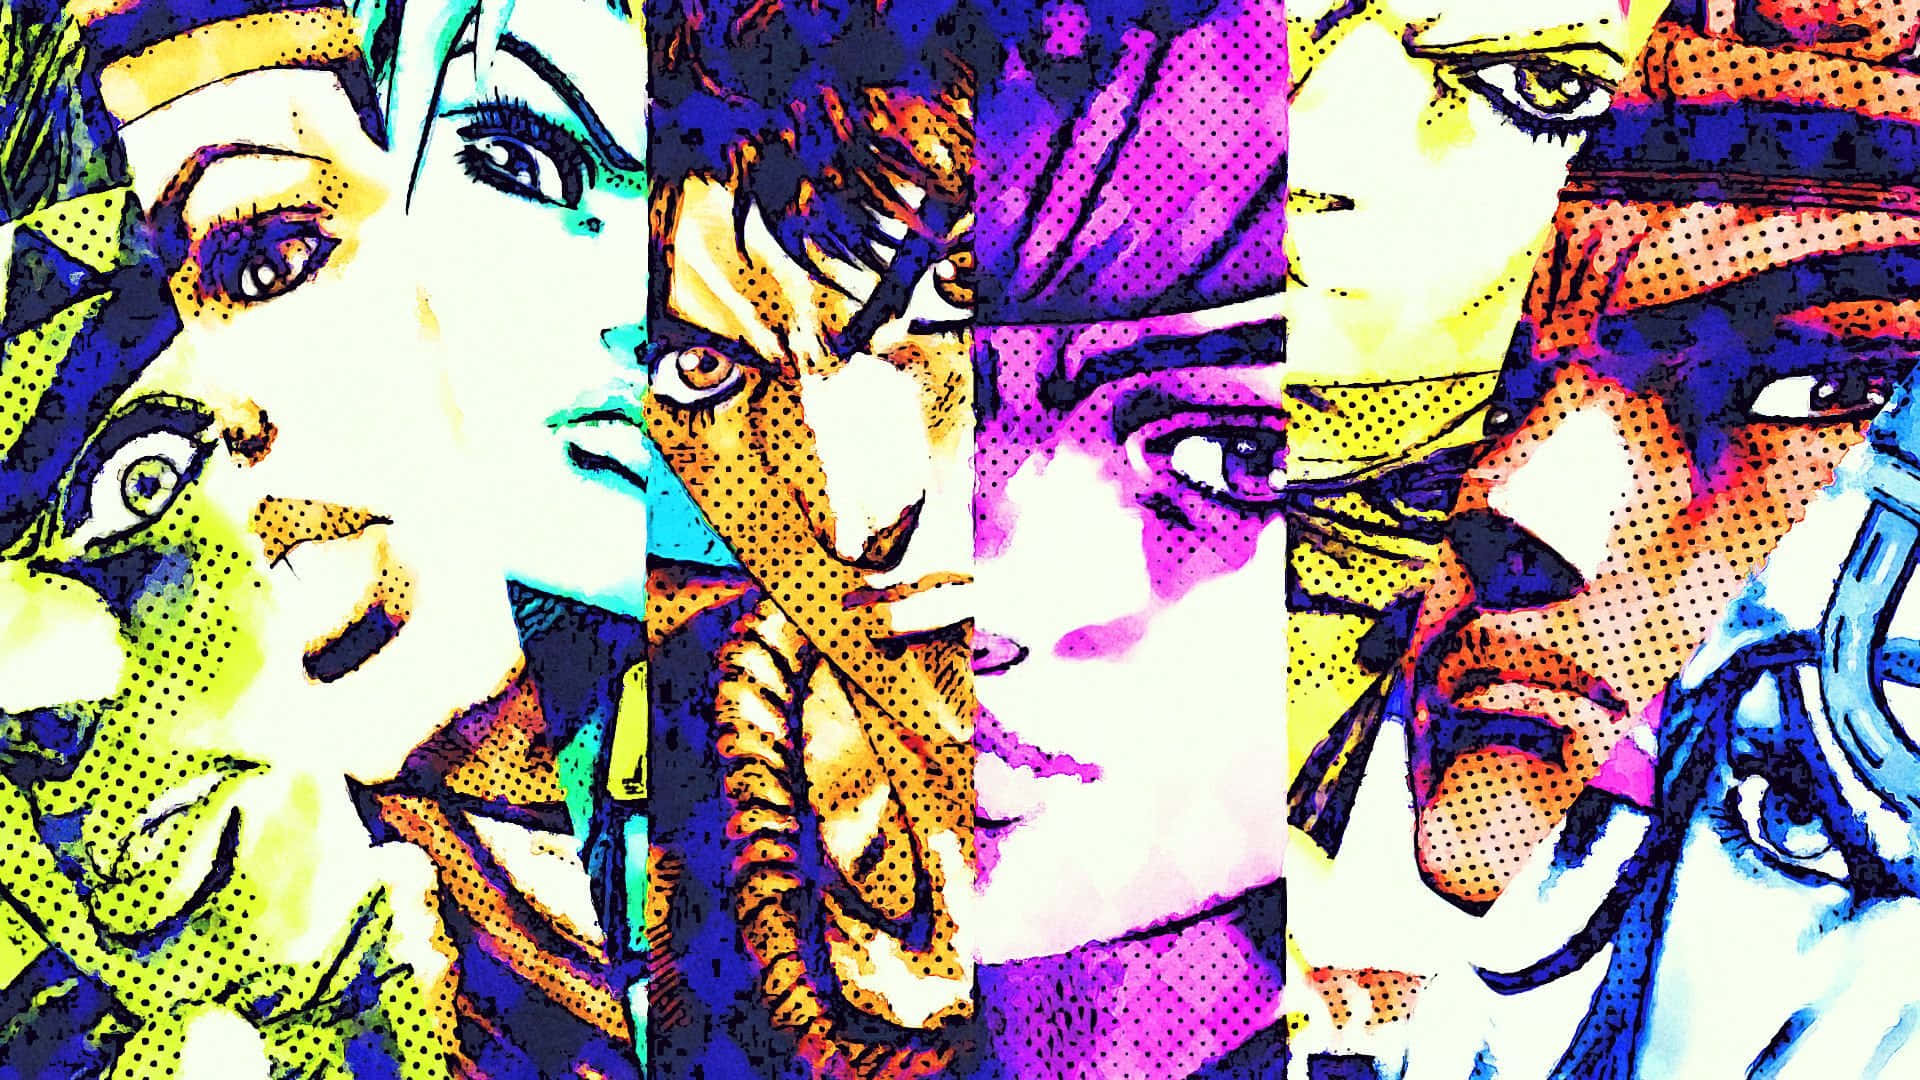 Caption: Exciting Diamond Is Unbreakable Wallpaper Wallpaper